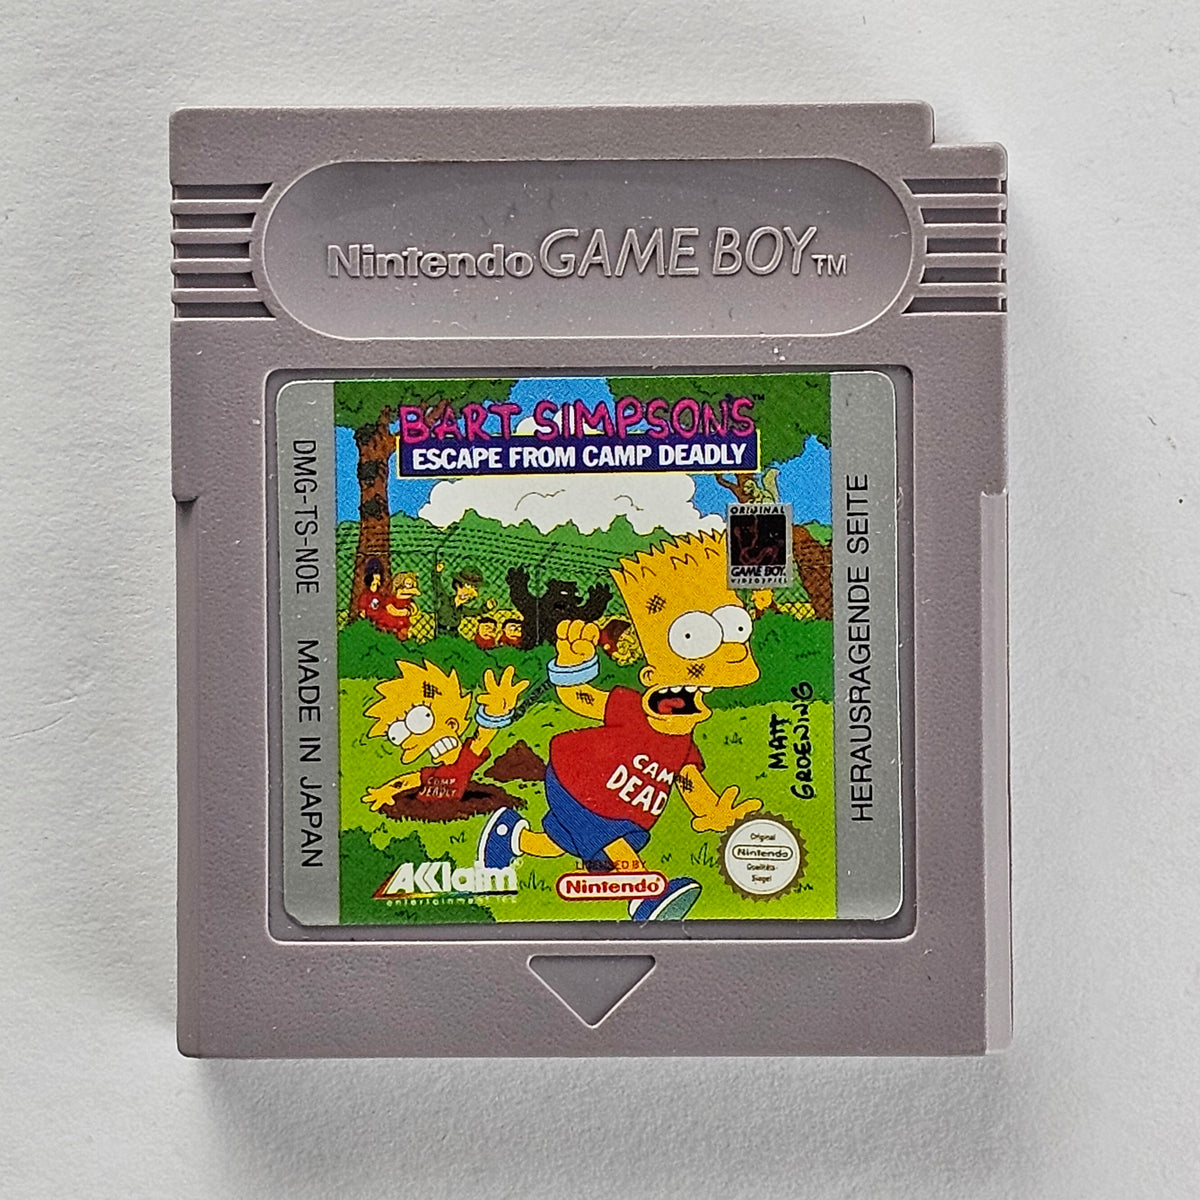 Bart Simpsons Escape from Camp [GB]